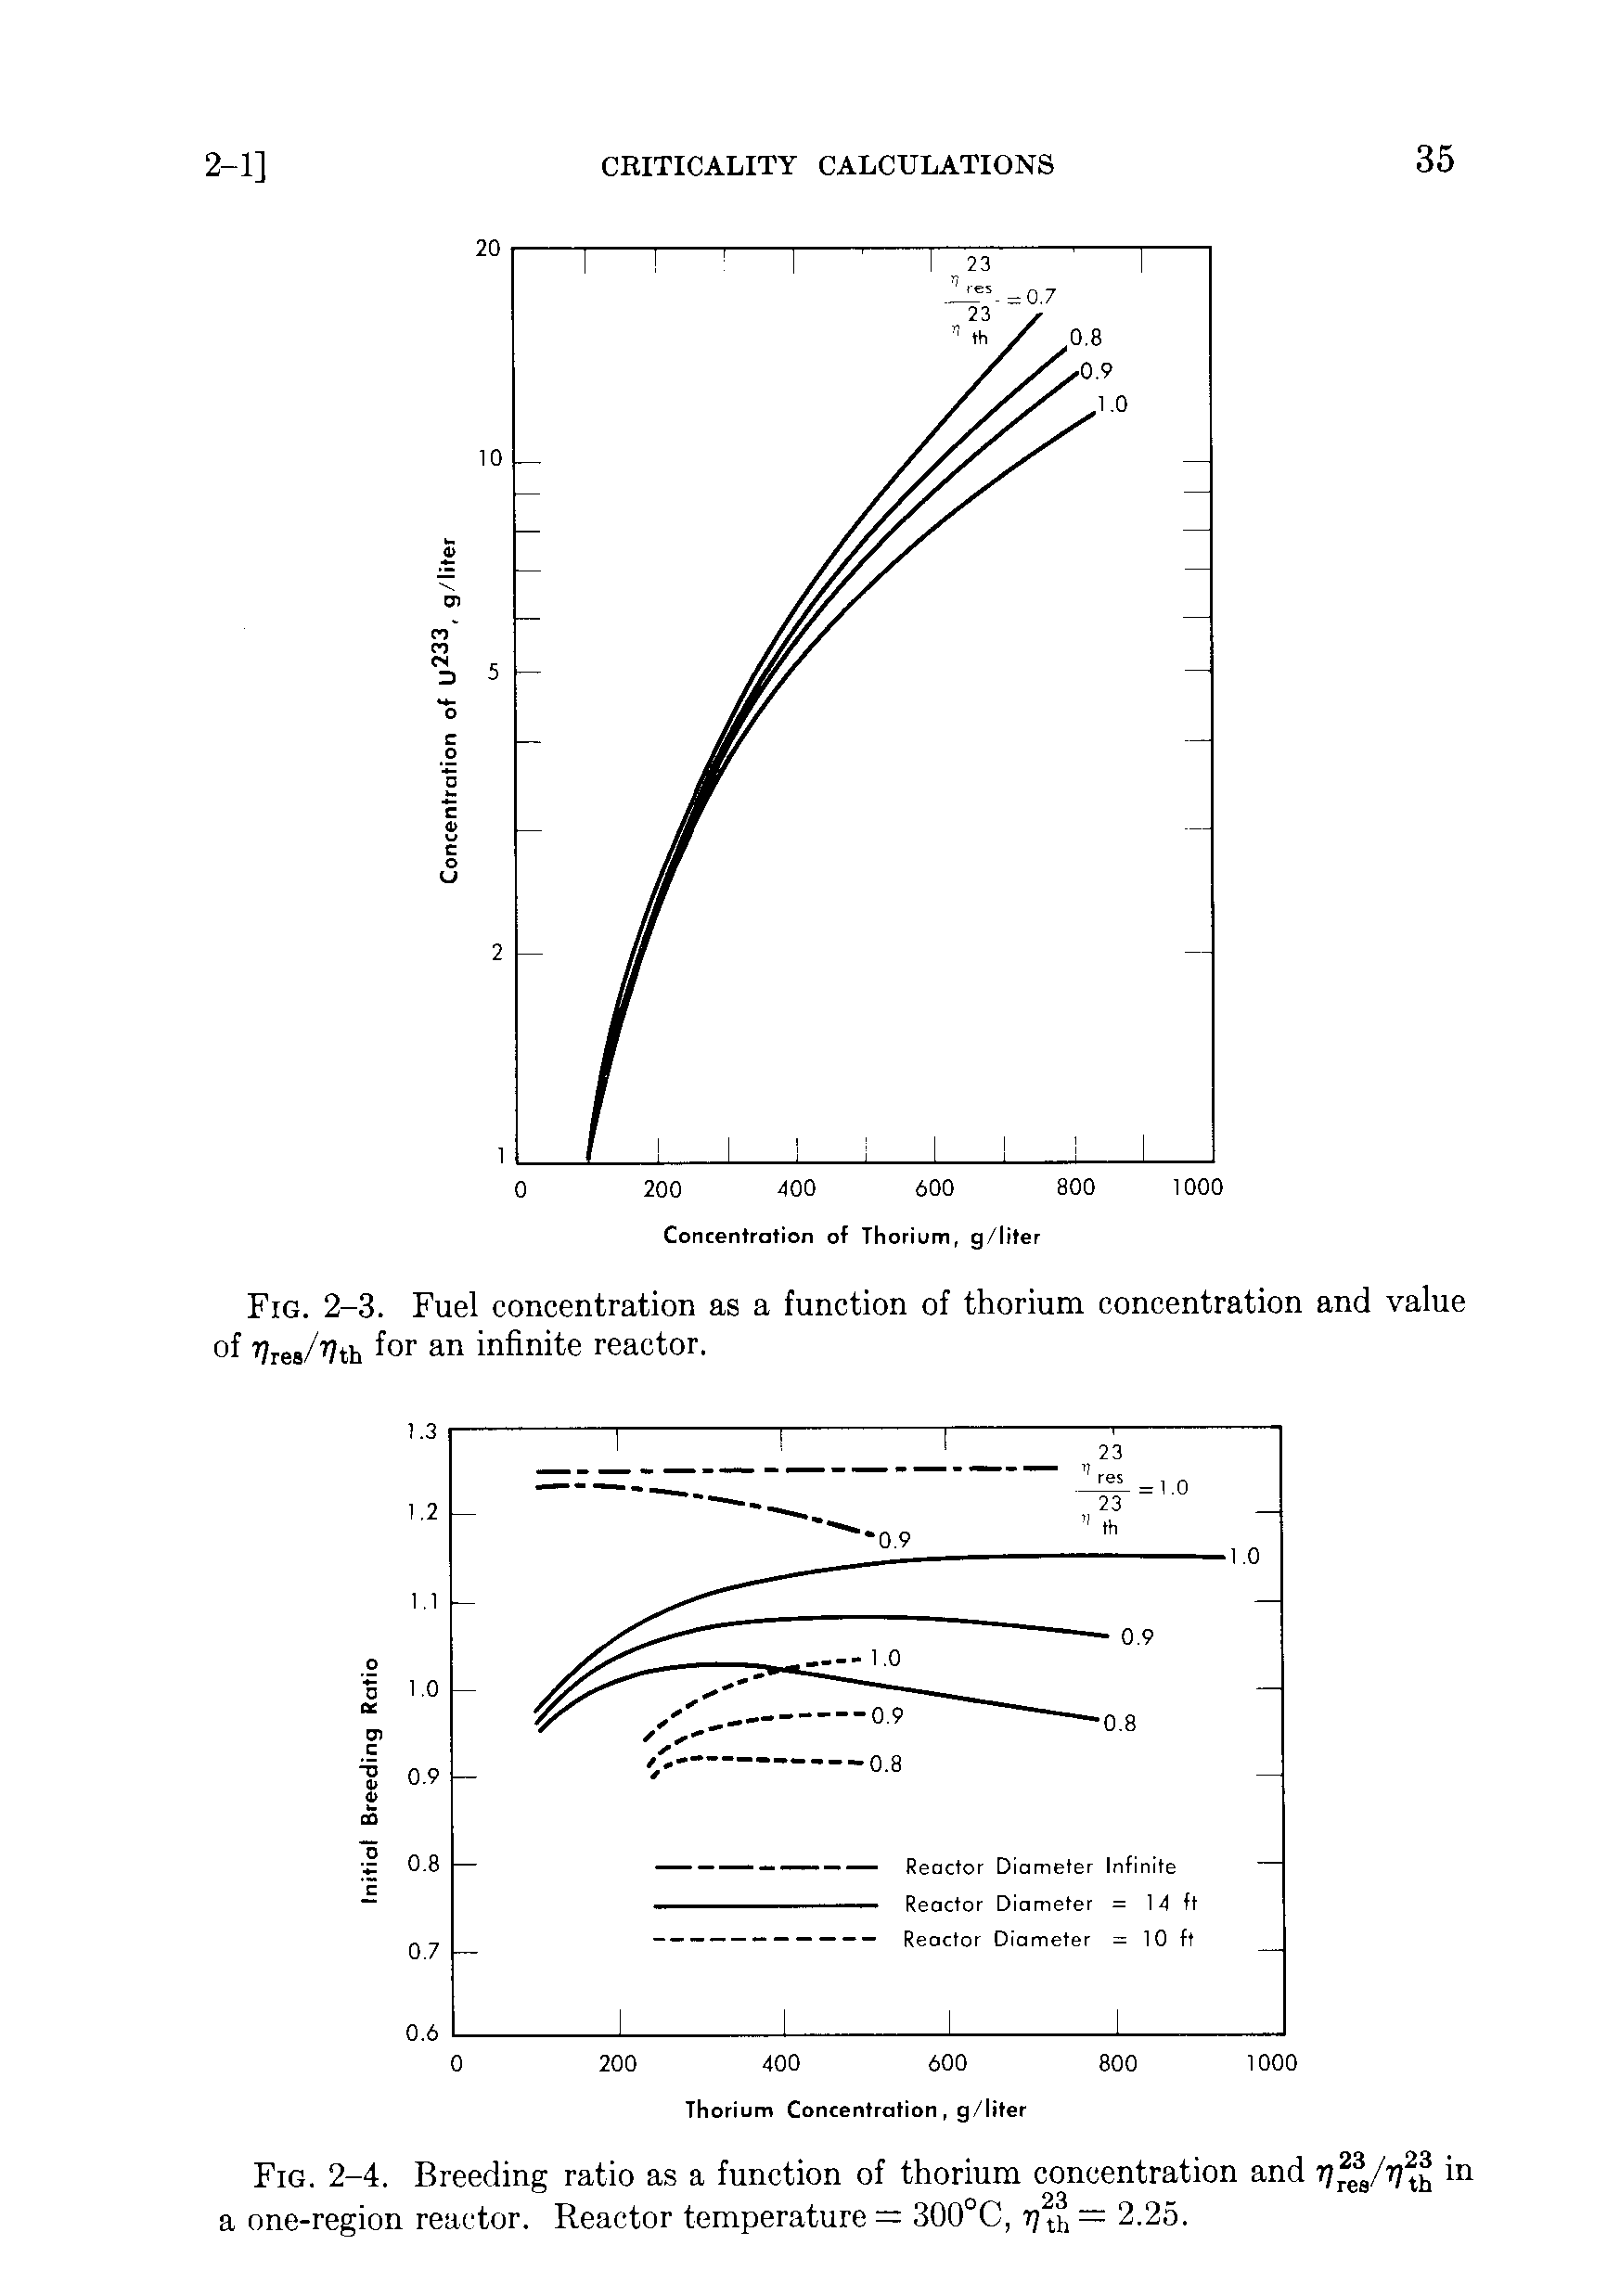 Fig. 2-4. Breeding ratio as a function of thorium concentration and vfea vih io a one-region reactor. Reactor temperature = 300°C, r tf, = 2.25.